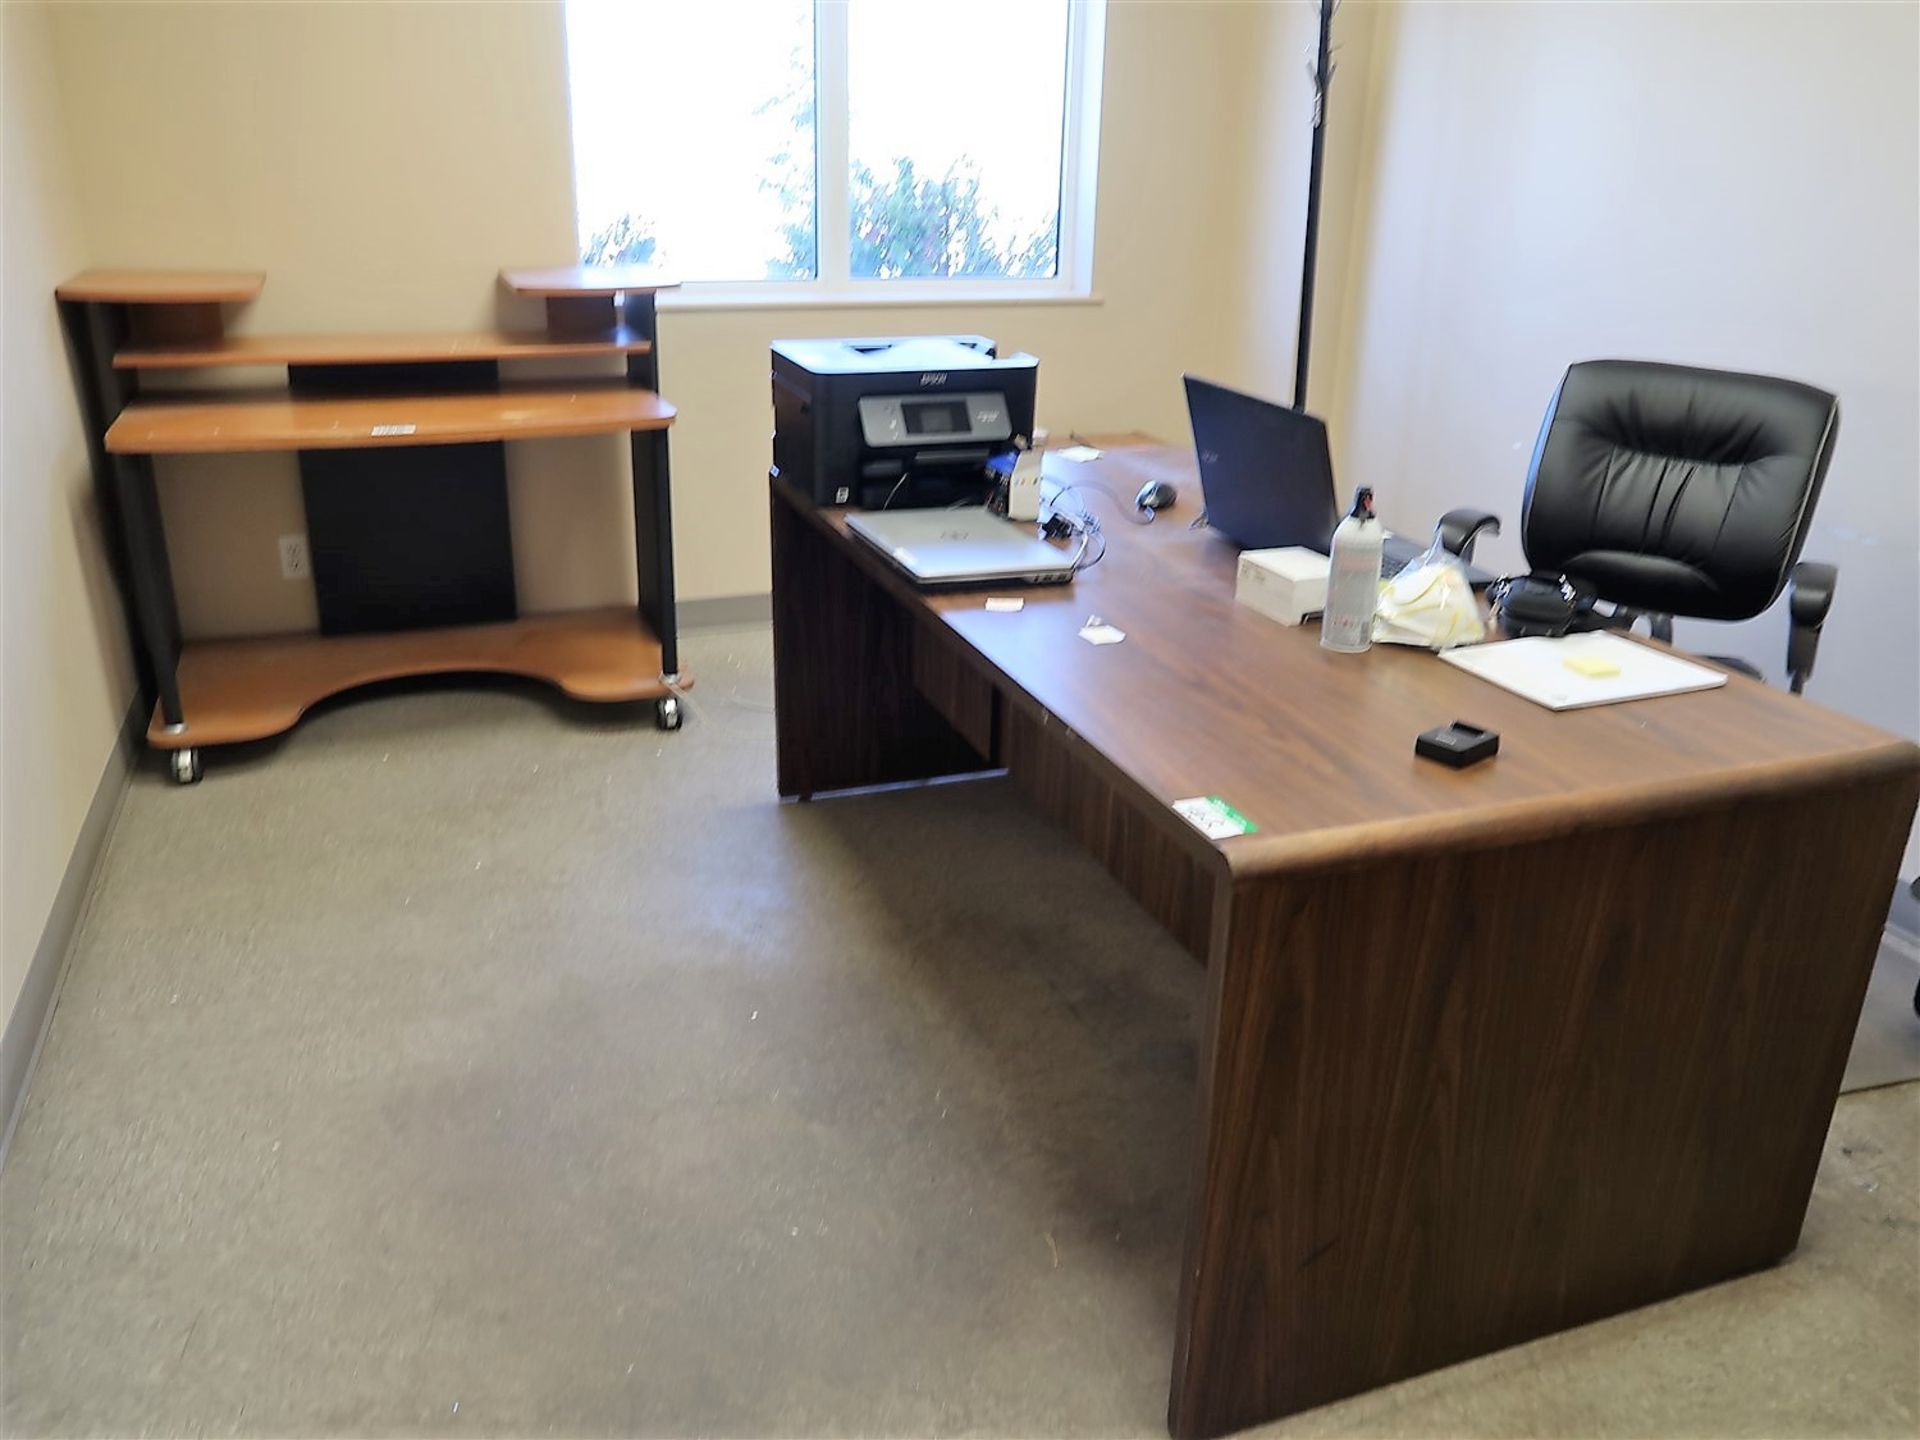 ALL OFFICE FURNITURE IN OFFICE ROOM W/PRINTER & DELL LAPTOP